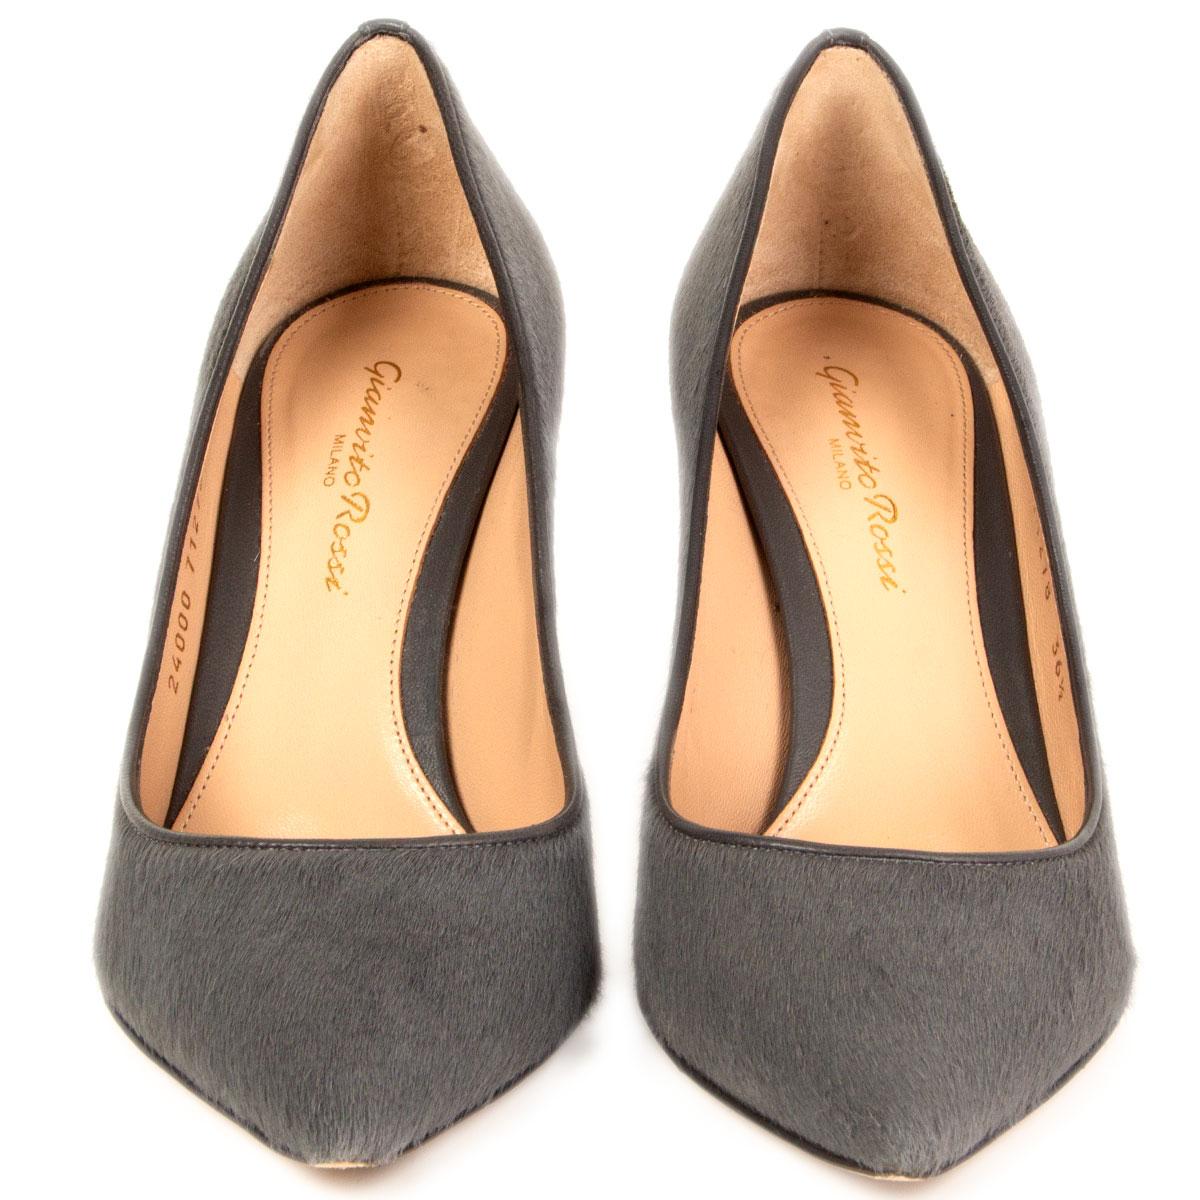 100% authentic Gianvito Rossi classic pointed-toe pumps in grey calf hair featuring a grey calfskin heel and pipping. Have been worn once and are in excellent condition. Come with dust bag. 

Measurements
Imprinted Size	36.5
Shoe Size	36.5
Inside